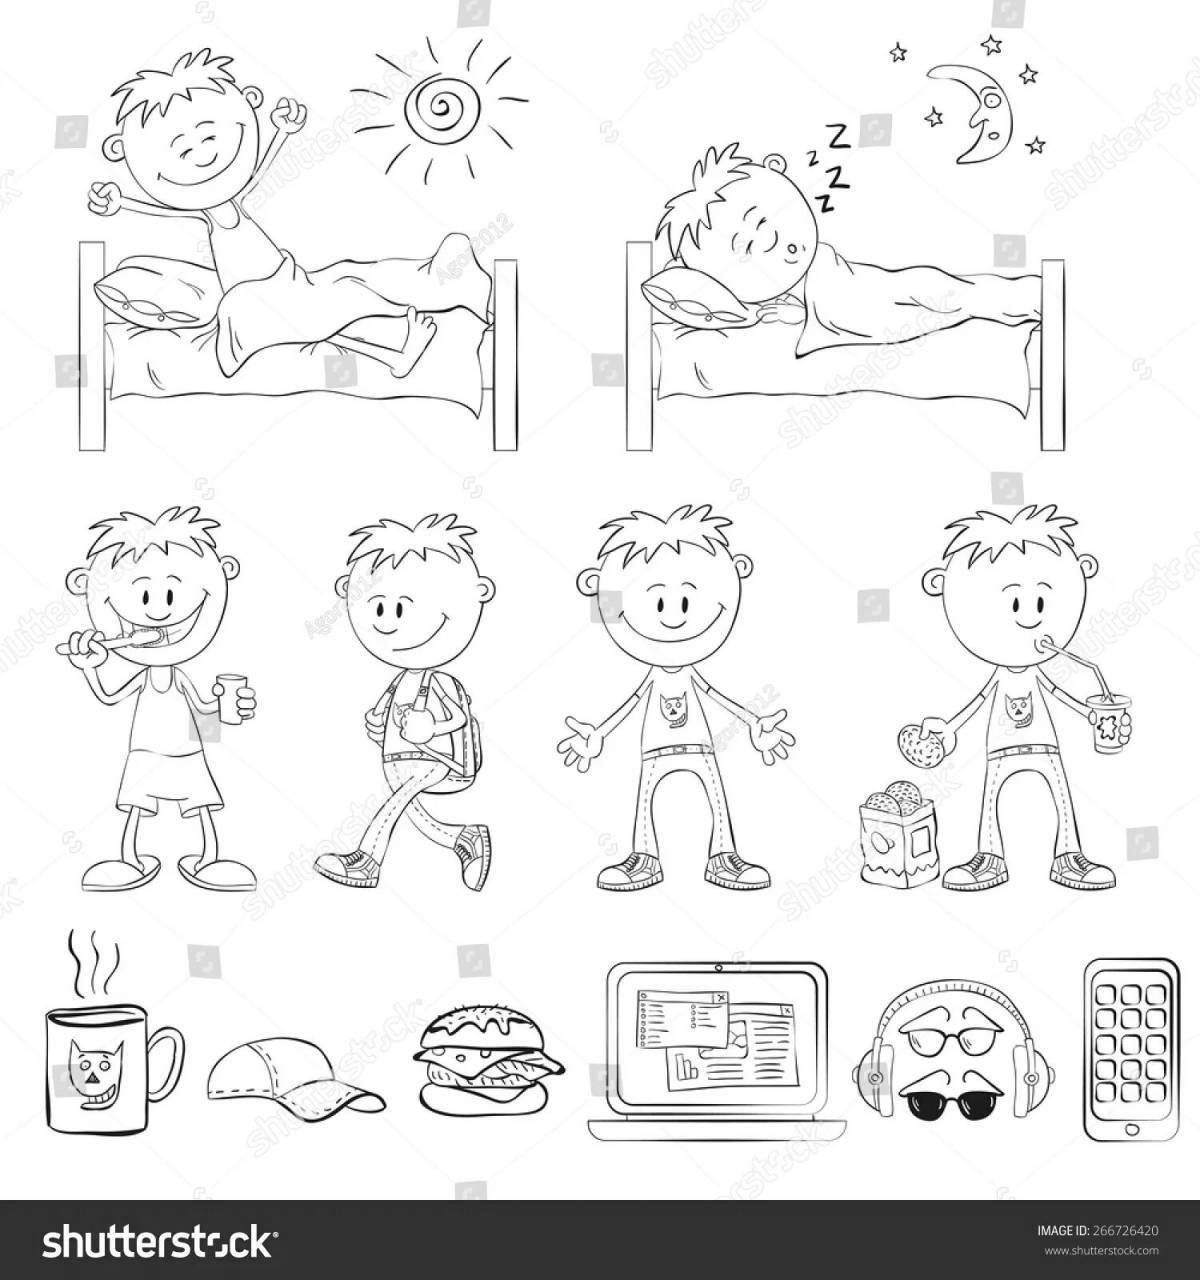 2nd grader's relaxing daily routine